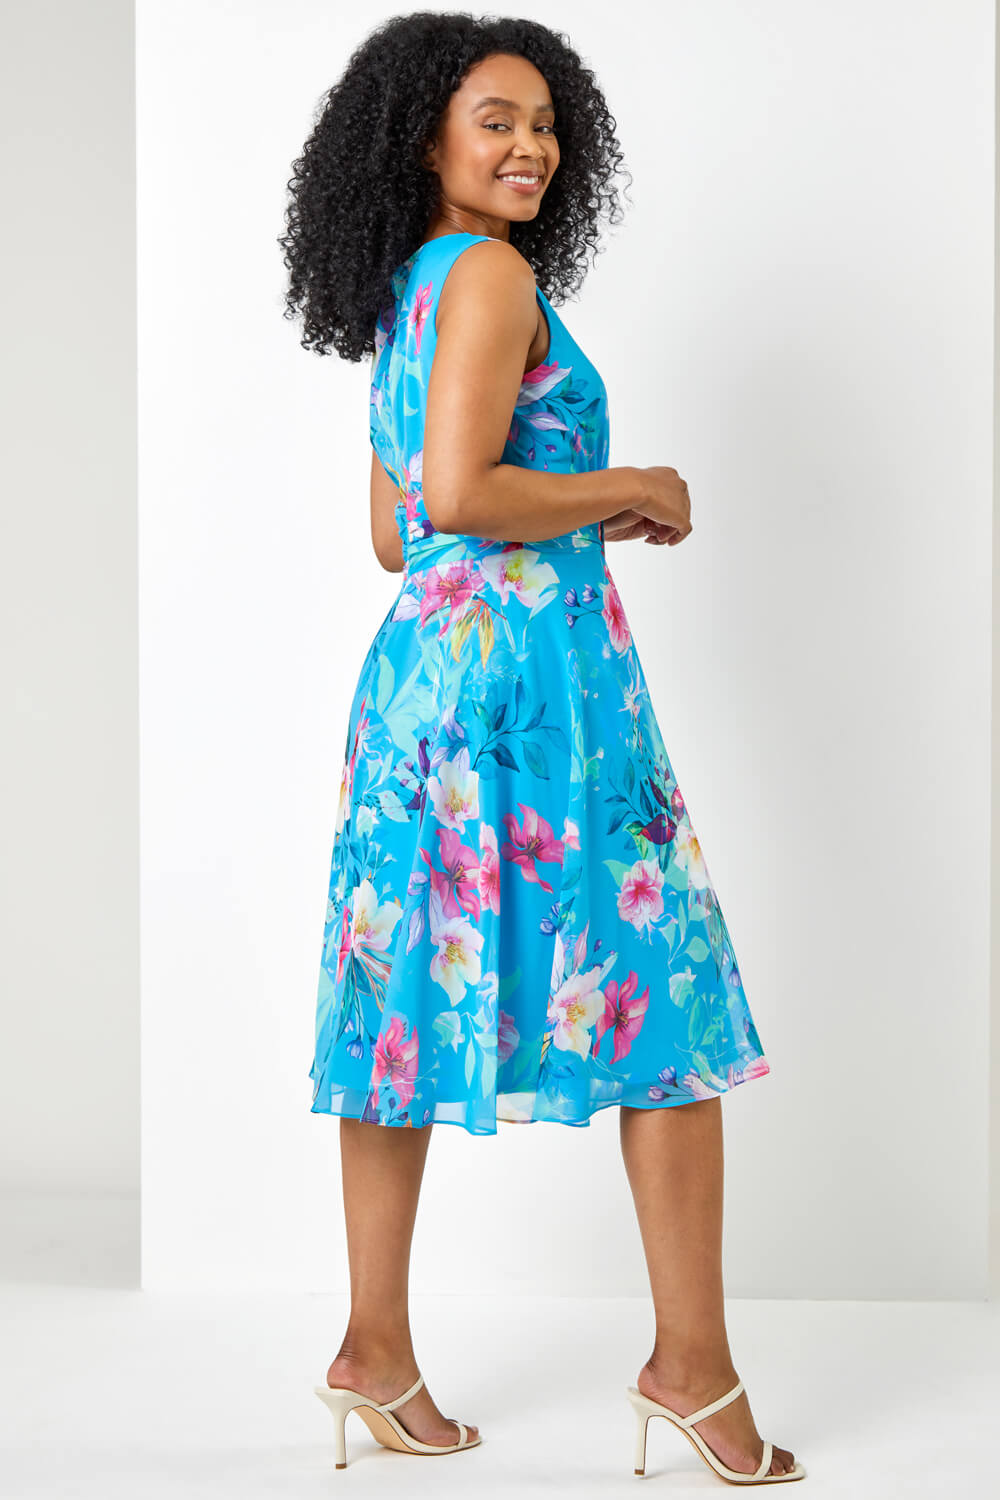 Turquoise Petite Floral Buckle Detail Chiffon Dress, Image 2 of 5